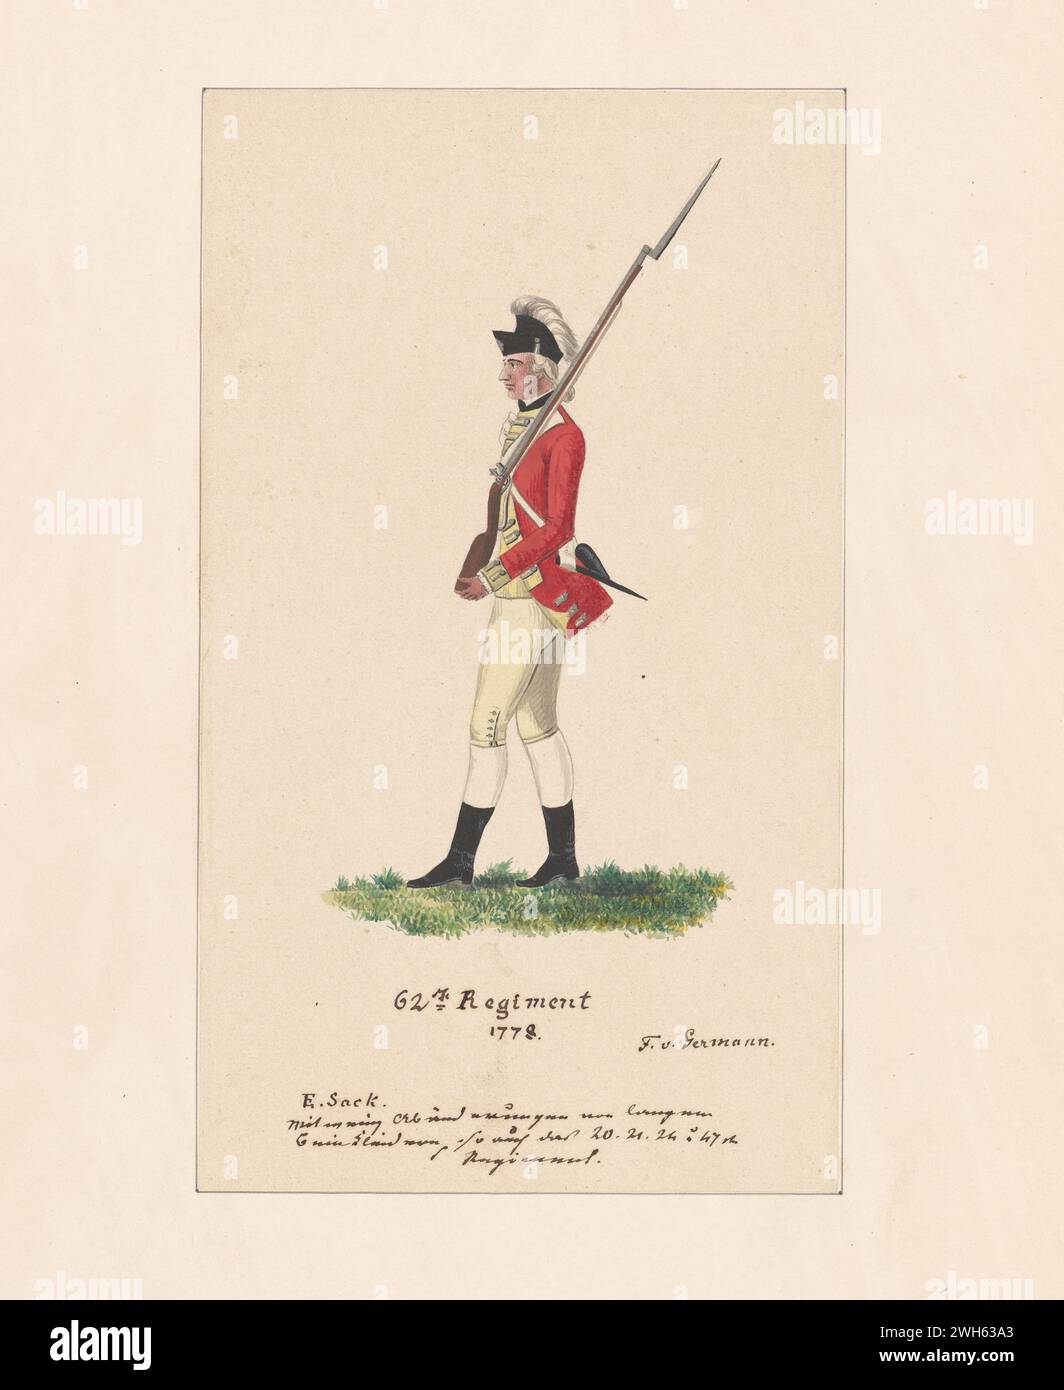 “Watercolor of a Soldier from the British 62nd Regiment of Foot during the American Revolutionary War” circa 1778.   From a series of prints by Friedrich von German captain of a regiment from Hesse-Hanau, one of the many German auxiliary troops hired by George III to fight in the American Revolution. He arrived in North America in 1775 During the war, he painted a series of watercolors of American, British, and German soldiers. Stock Photo